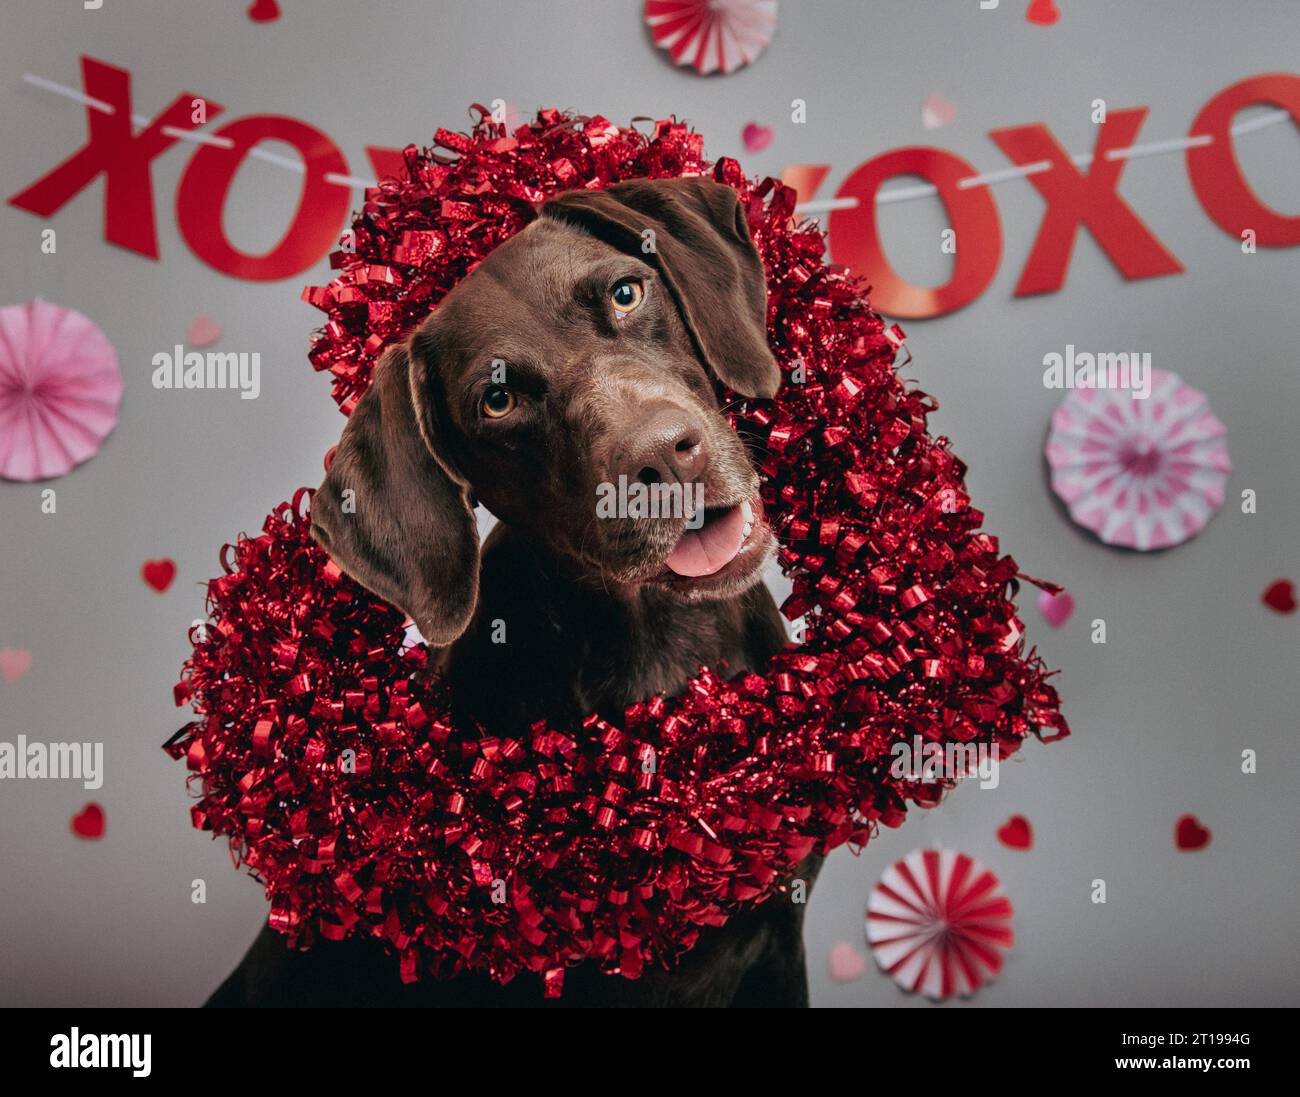 German shorthaired pointer wearing a heart shape wreath Stock Photo